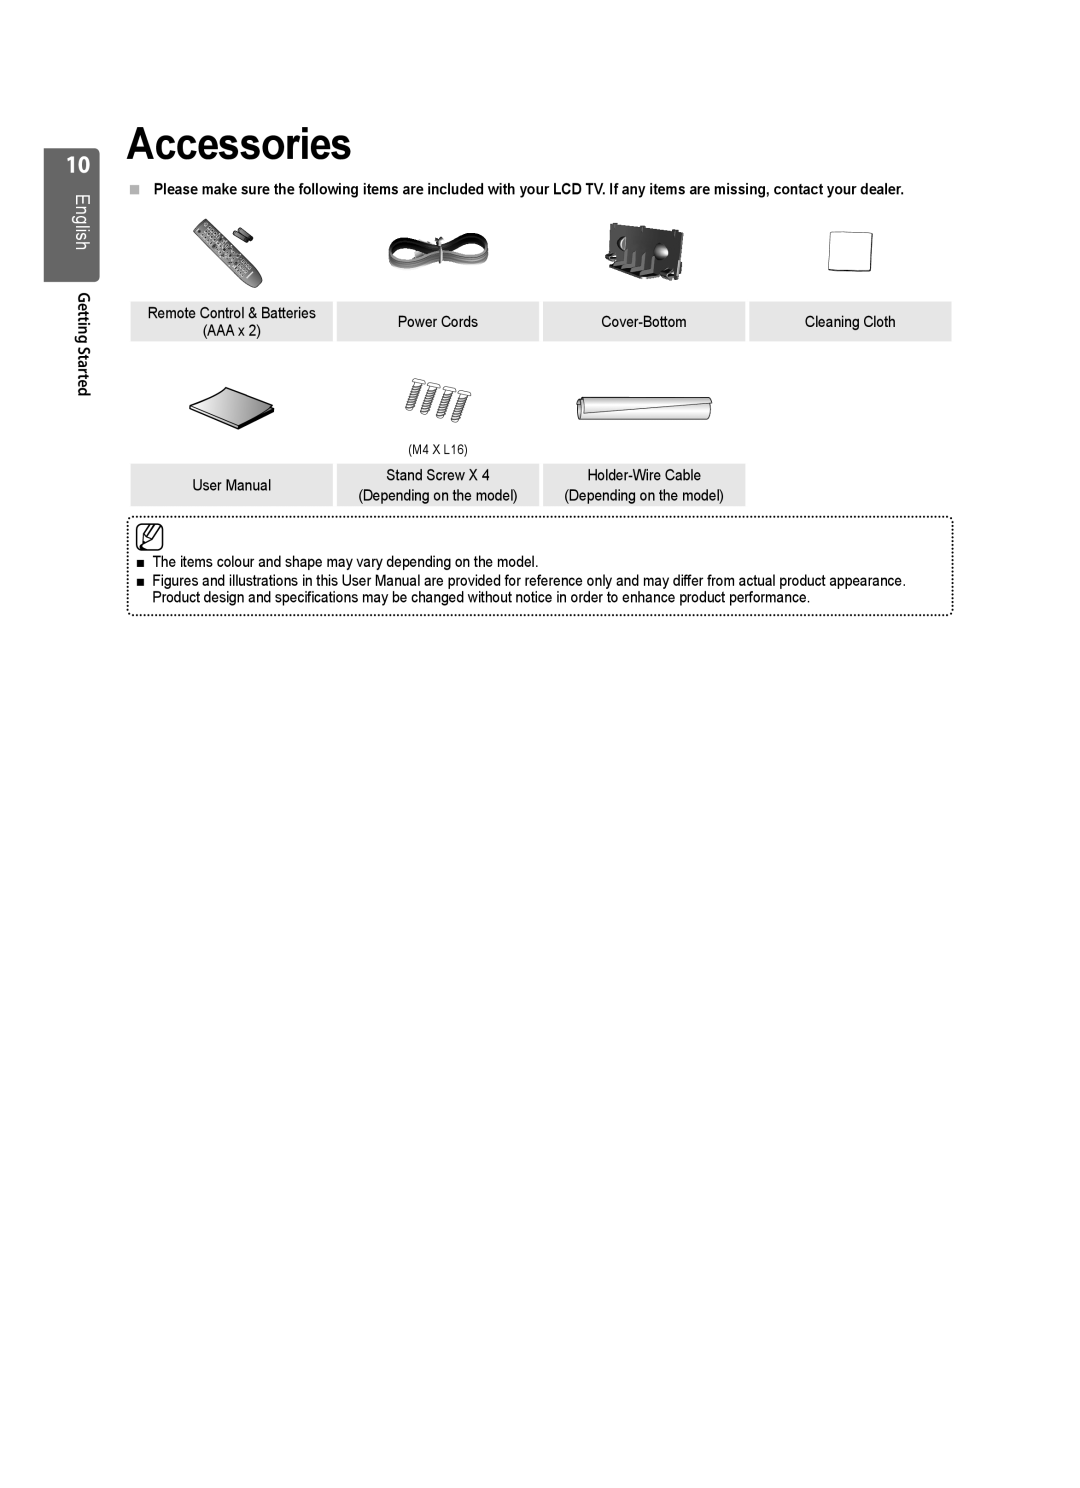 Samsung LE40B551, LE40B550, LE40B554, LE40B553 Accessories, English Getting Started, Power Cords, Cover-Bottom, User Manual 